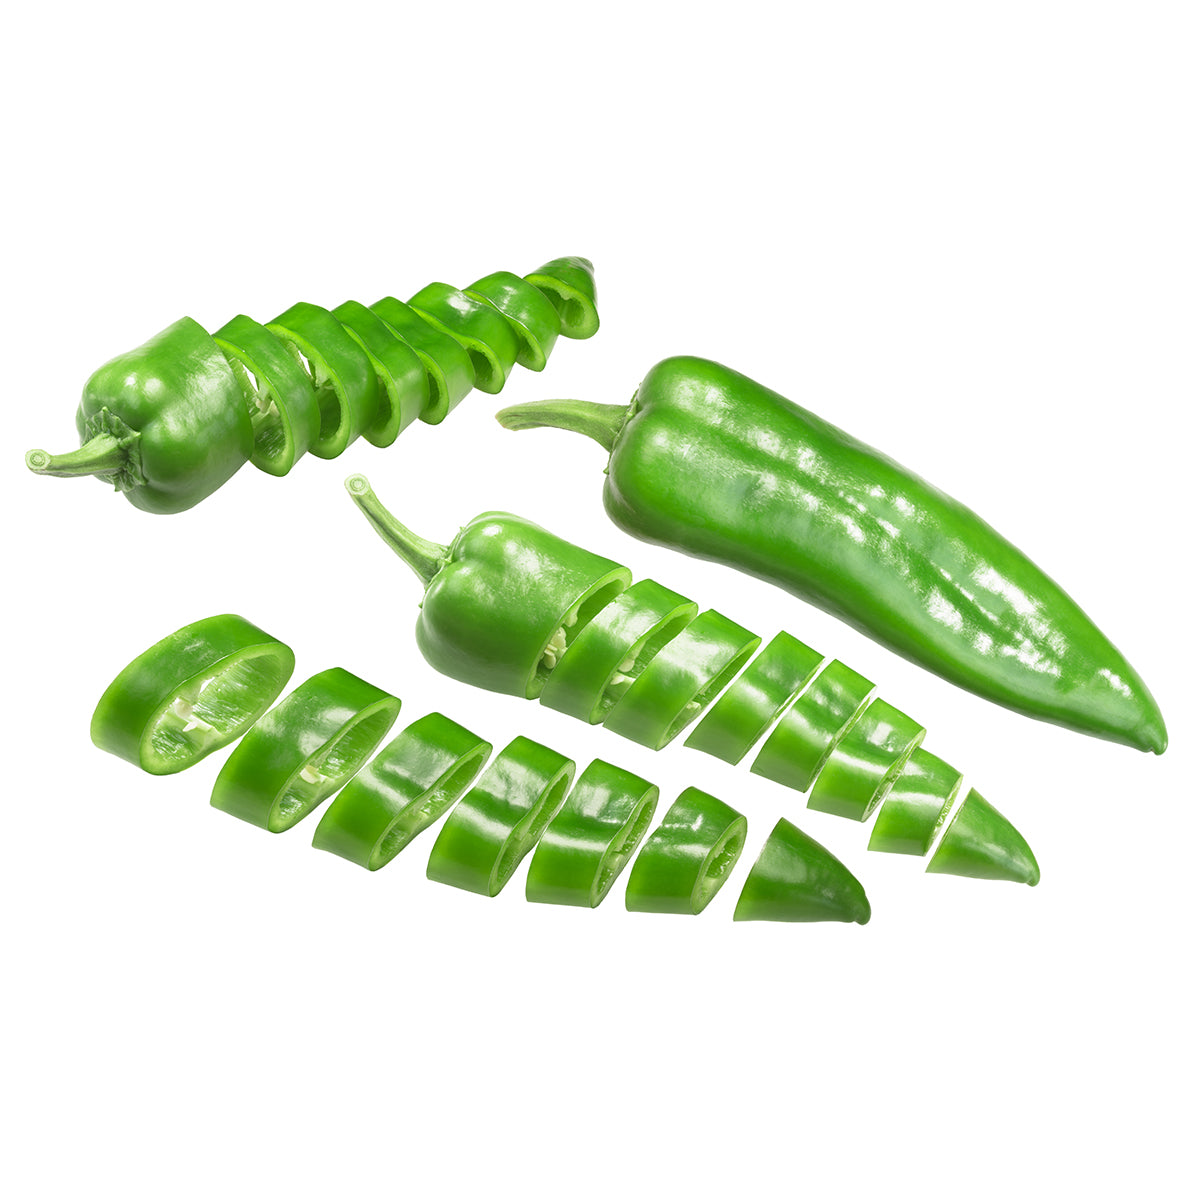 Hot Fresh Hatch Green Chile Peppers | G76 - Sandia - The Fresh Chile Company